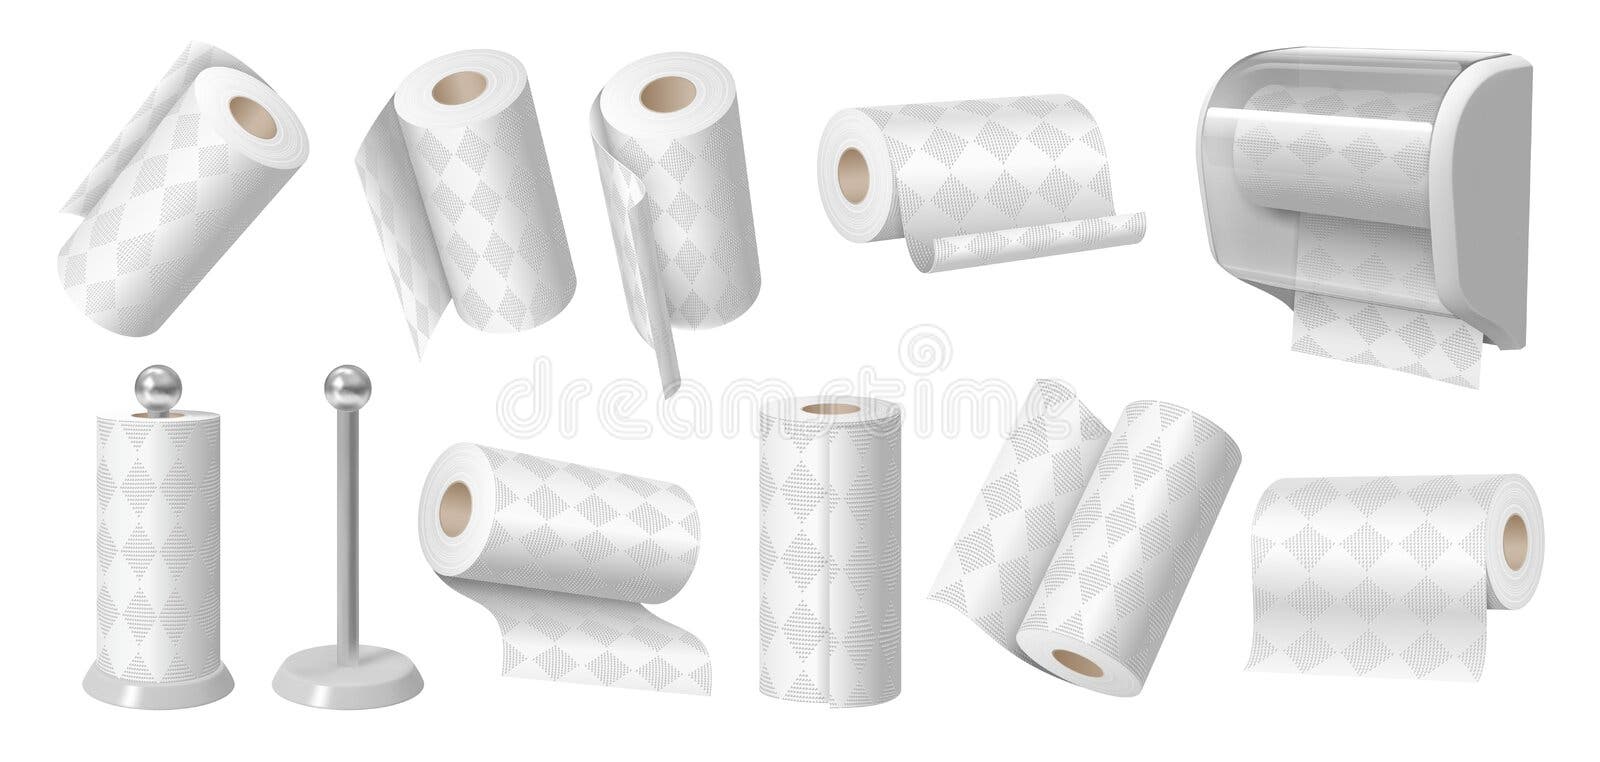 https://thumbs.dreamstime.com/b/paper-towels-kitchen-towel-roll-white-wipes-cylinder-stand-soft-tissue-absorbent-d-isolated-vector-illustration-set-wipe-256115081.jpg?w=1600